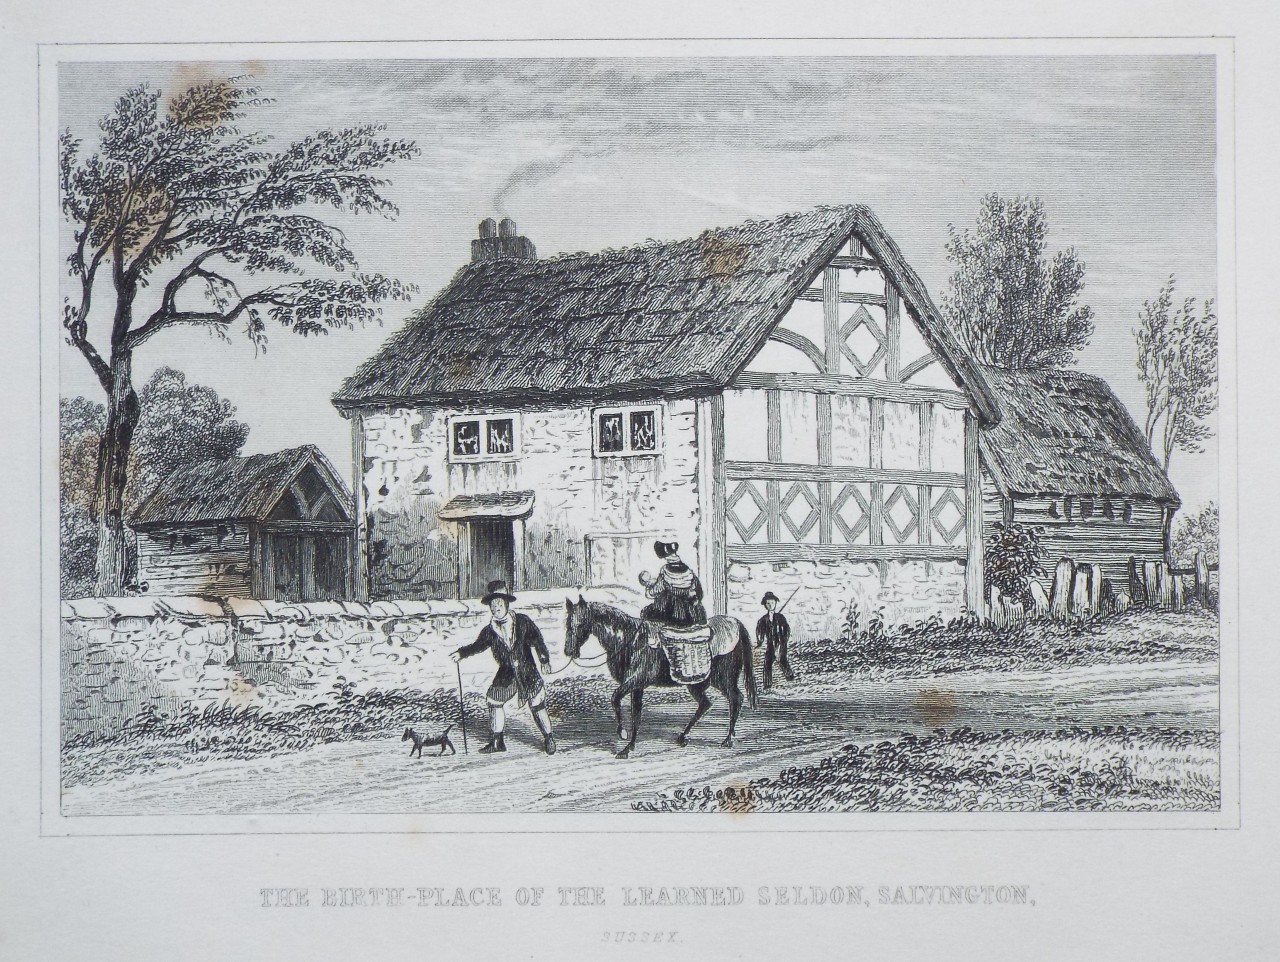 Print - The Birth-place of the Learned Seldon, Salvington, Sussex.